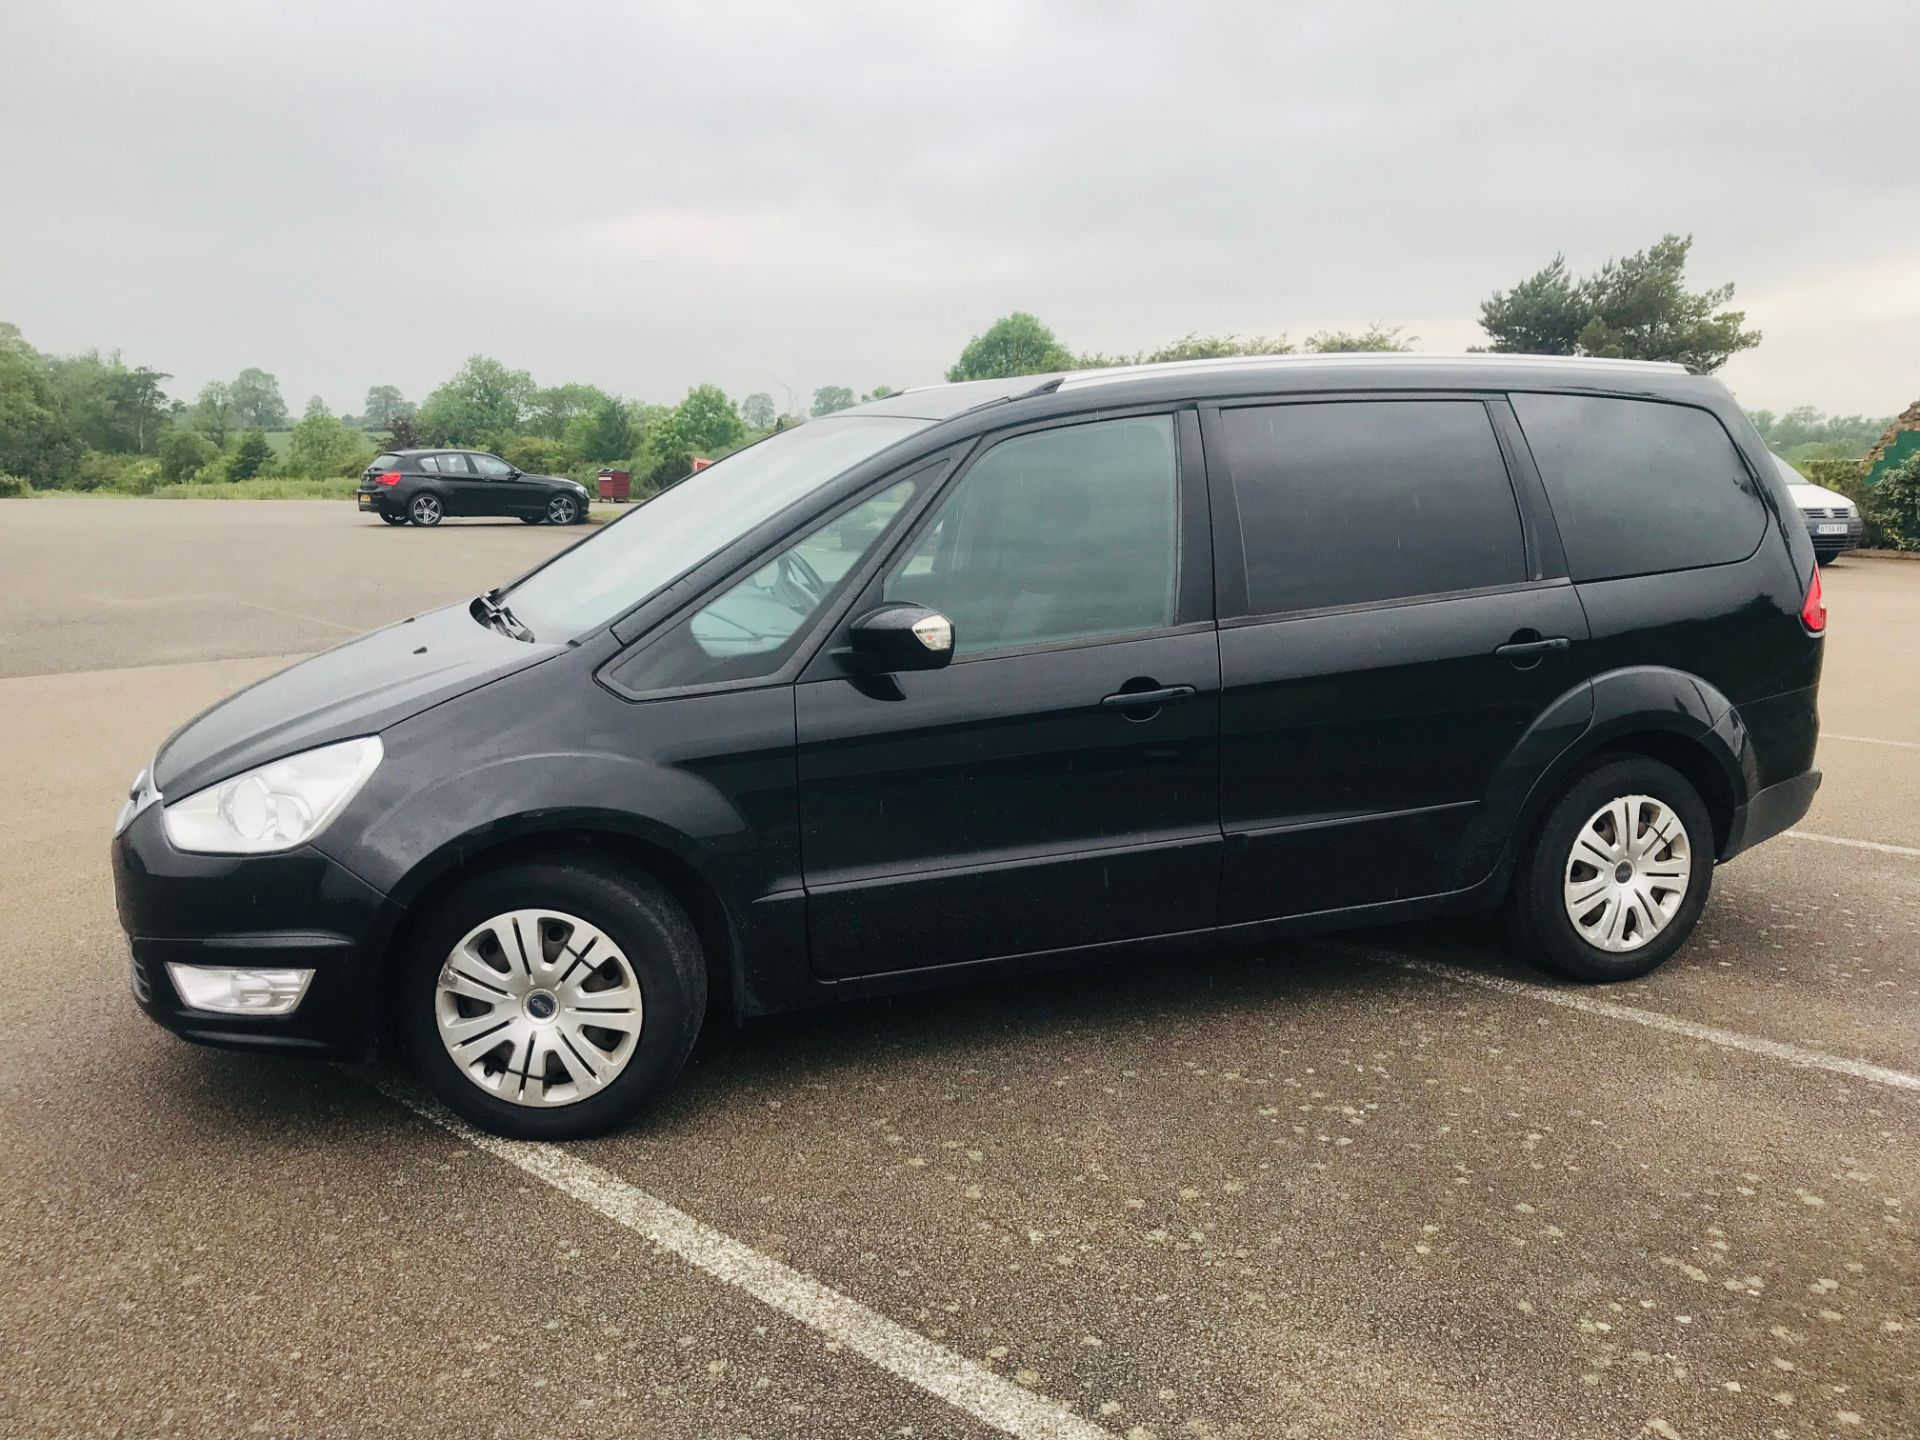 ON SALE FORD GALAXY 2.0TDCI POWER SHIFT "ZETEC" 7 SEATER (13 REG) AIR CON - ELEC PACK - AUTOMATIC - Image 5 of 14